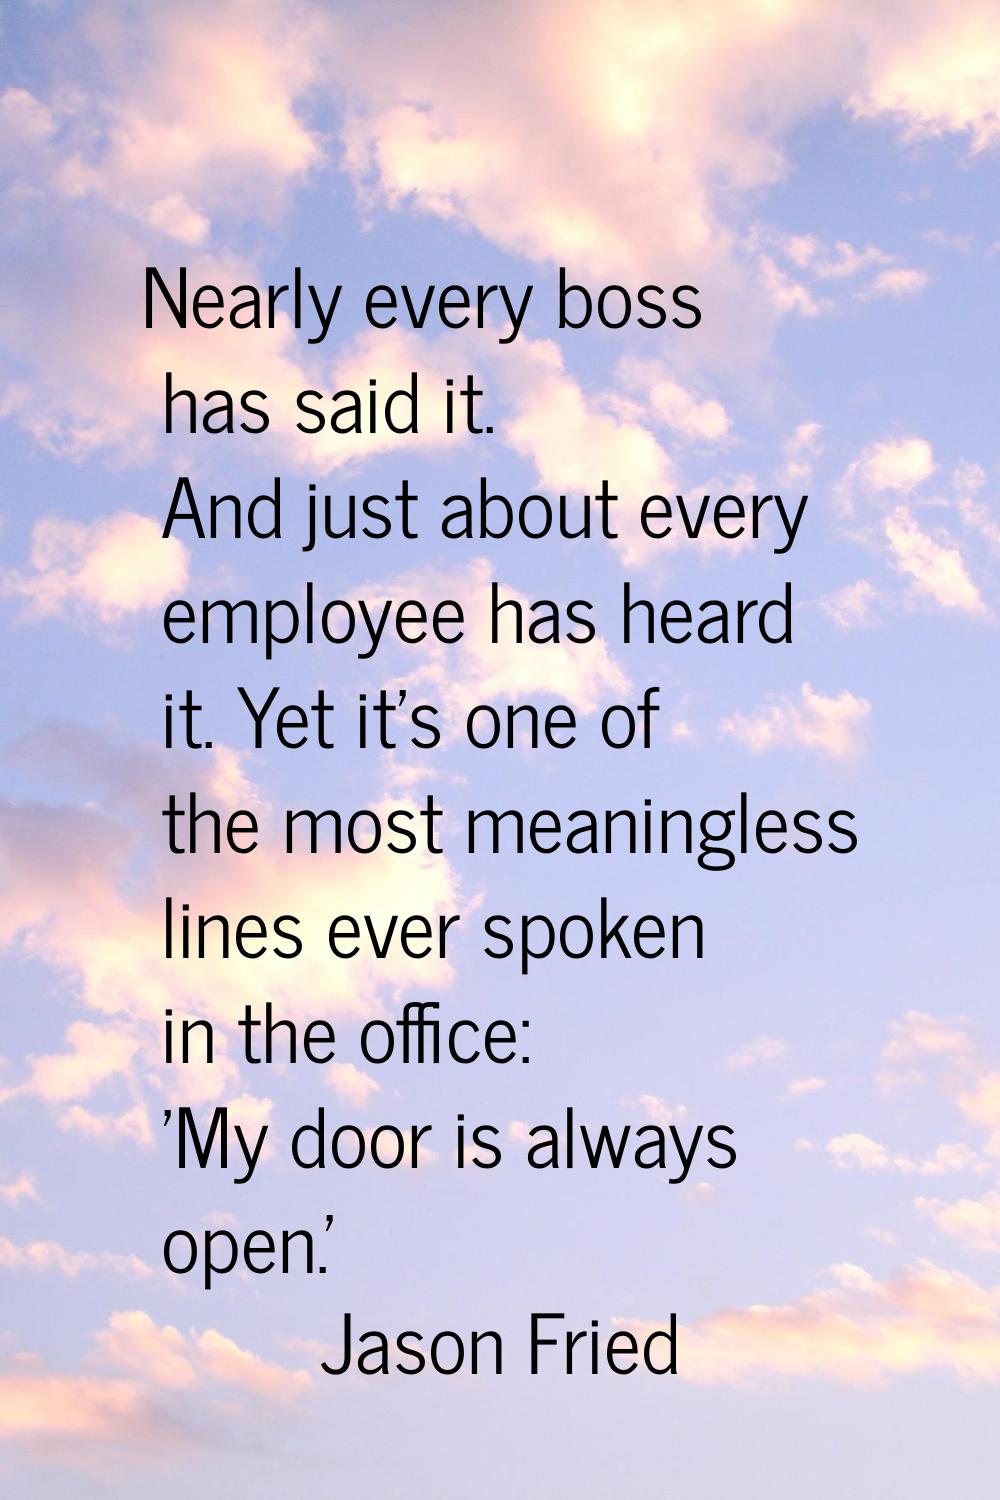 Nearly every boss has said it. And just about every employee has heard it. Yet it's one of the most